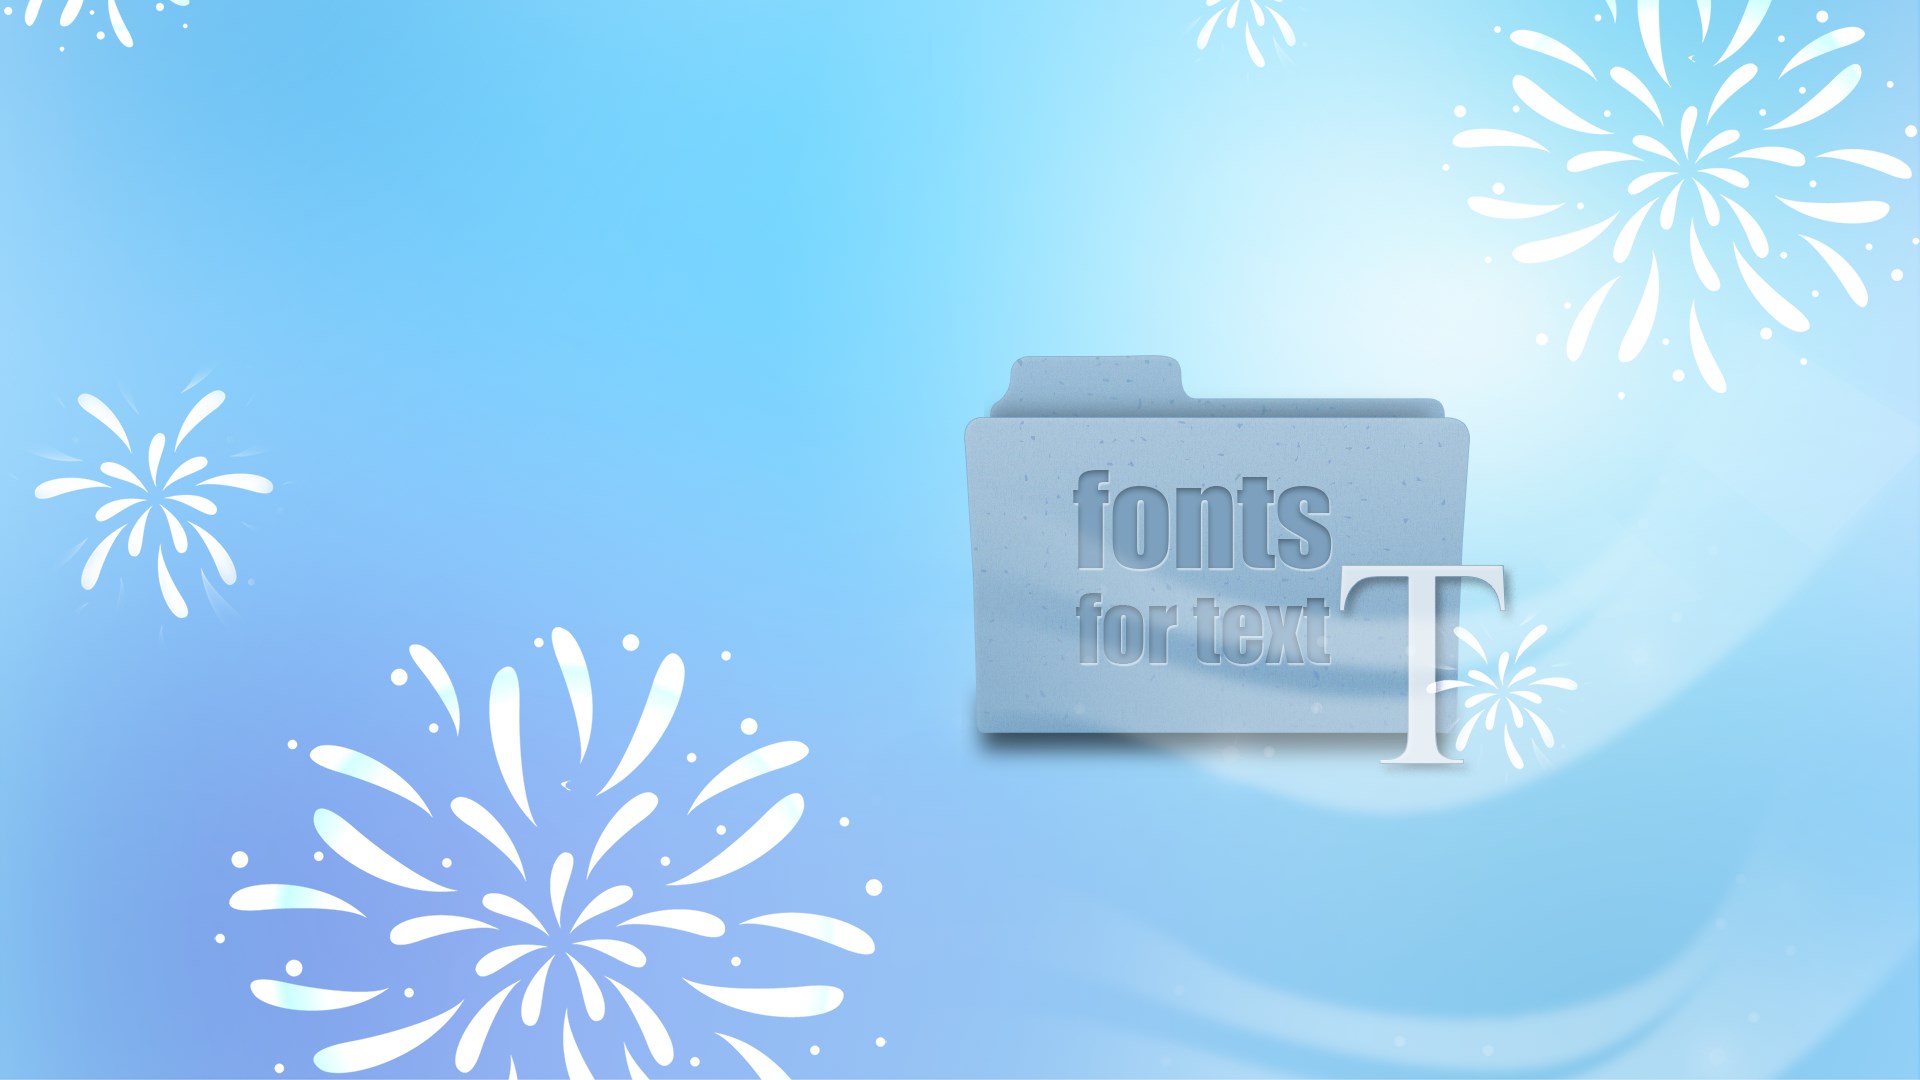 Get Fonts For Text Microsoft Store